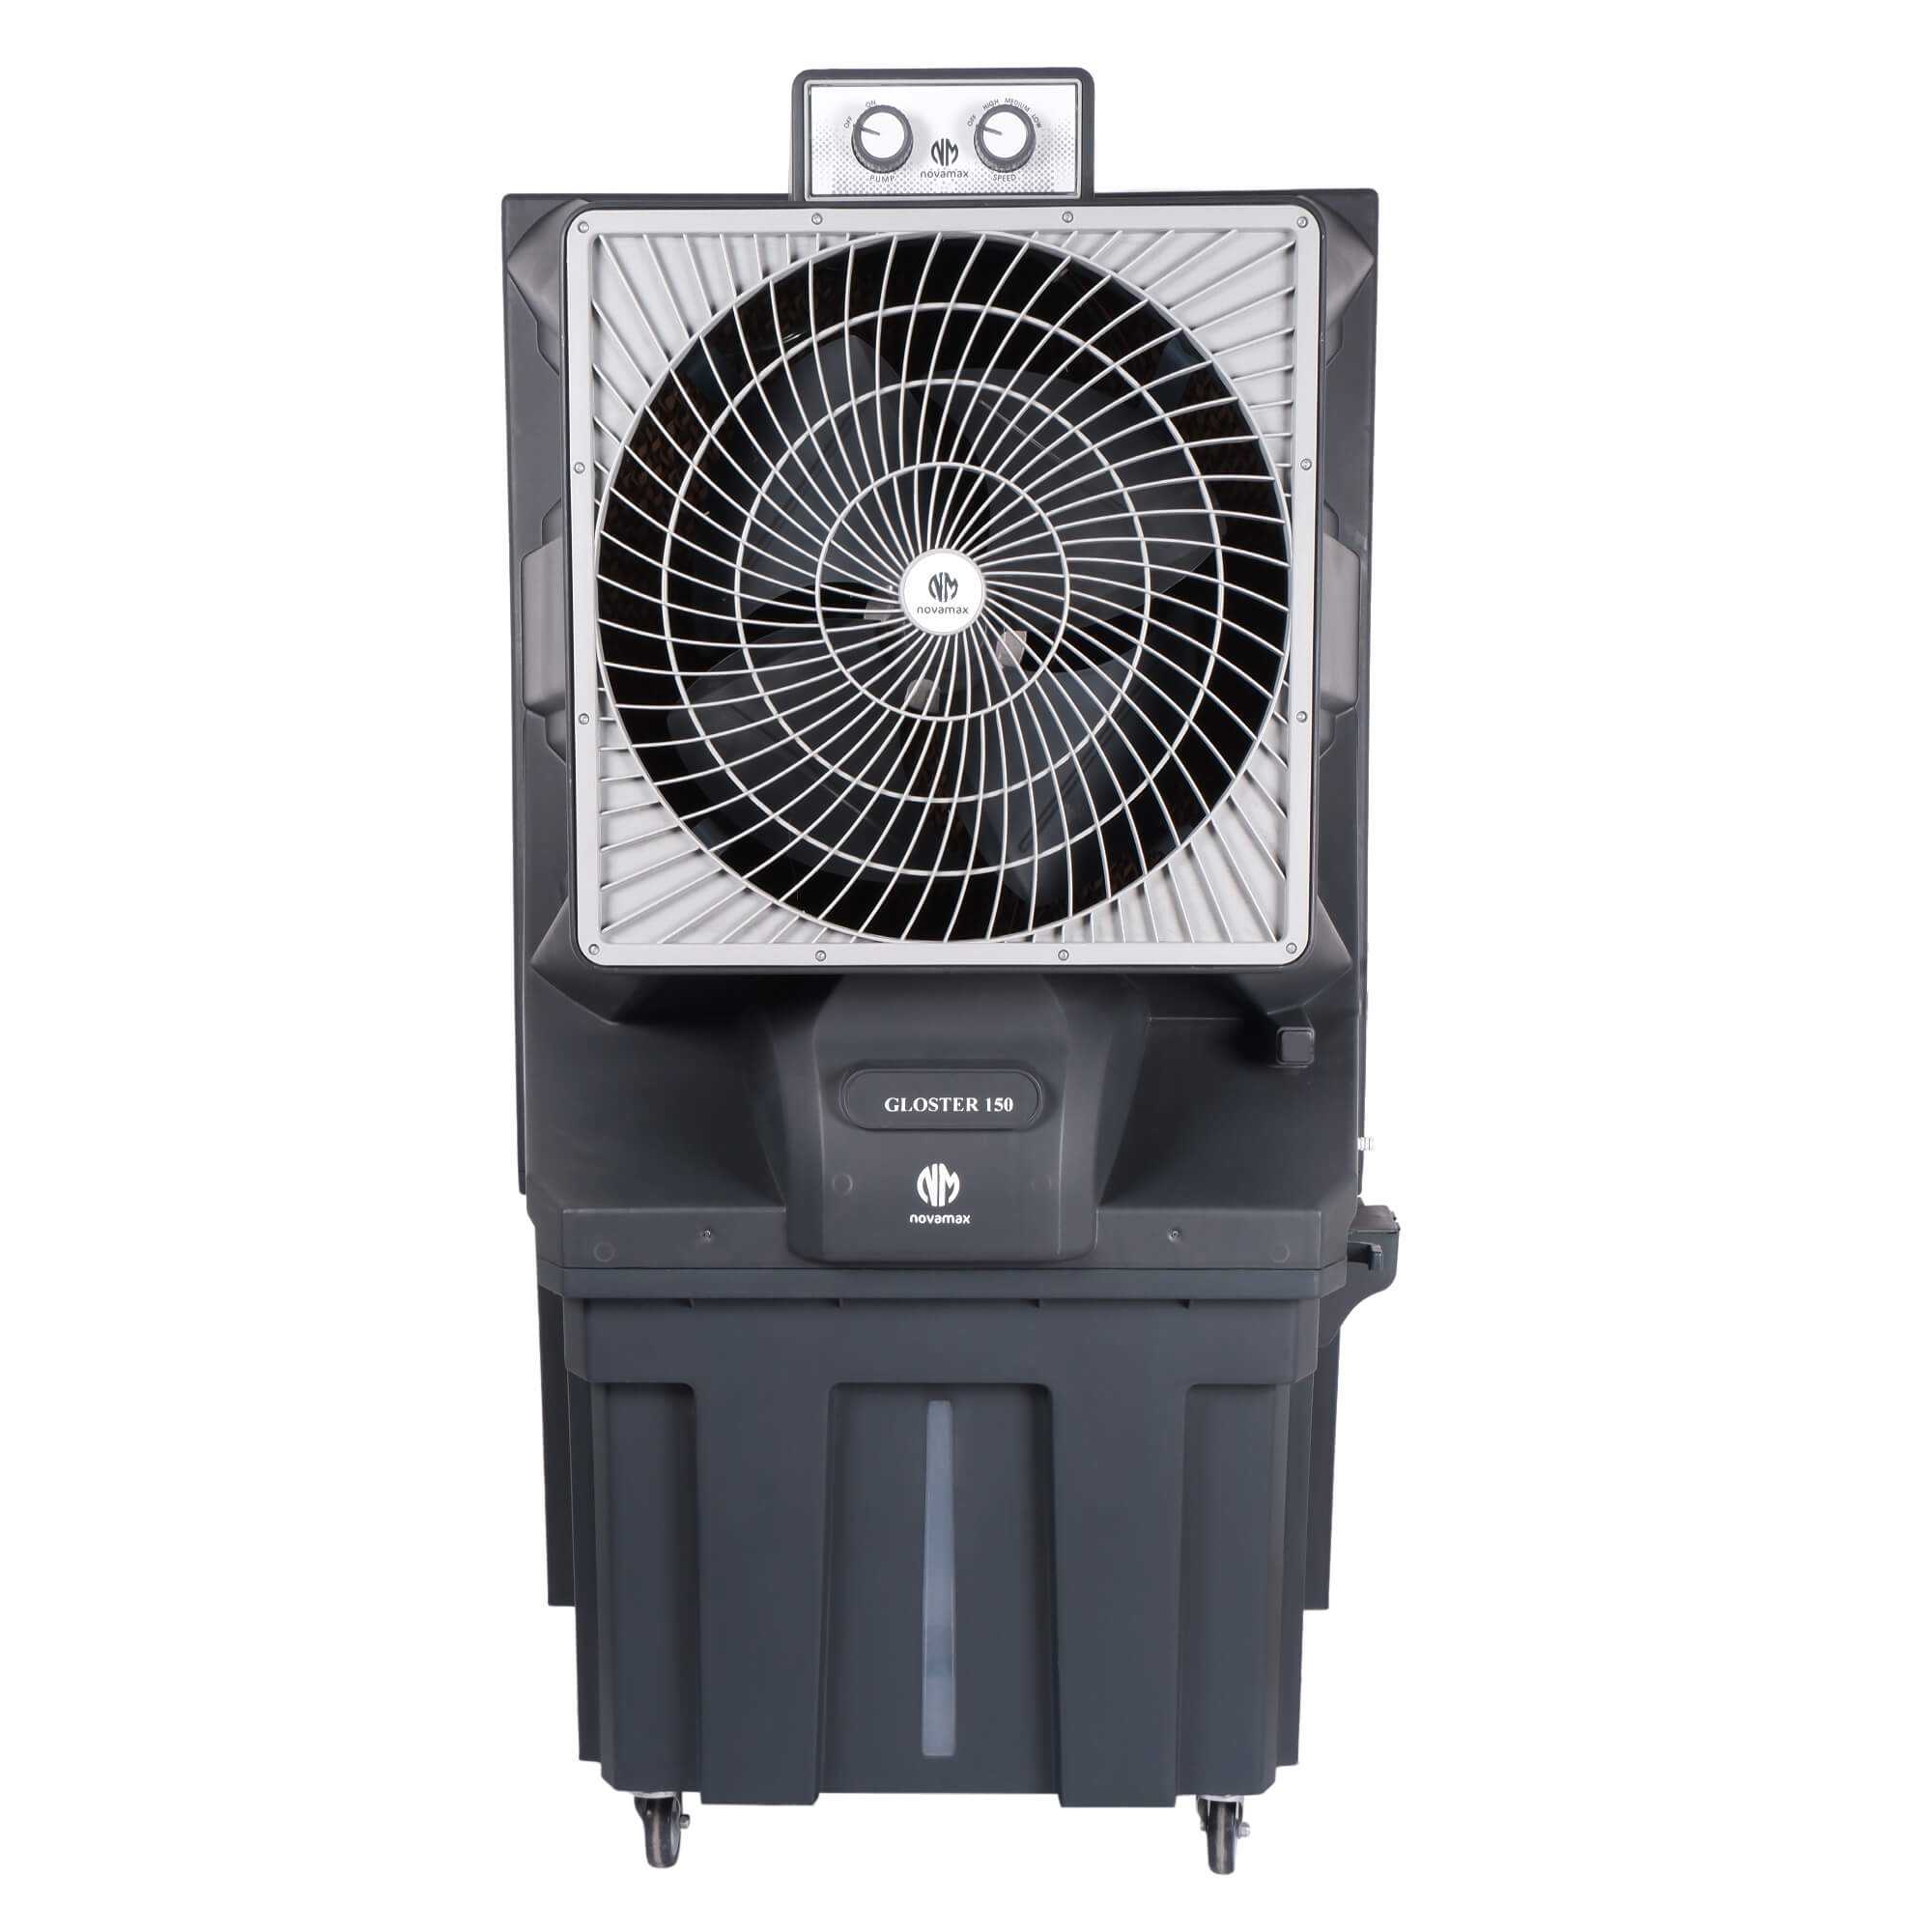 NOVAMAX GLOSTER 150 L Commercial Air Cooler  (Grey, With Powerful Air Throw, Honeycomb Cooling)